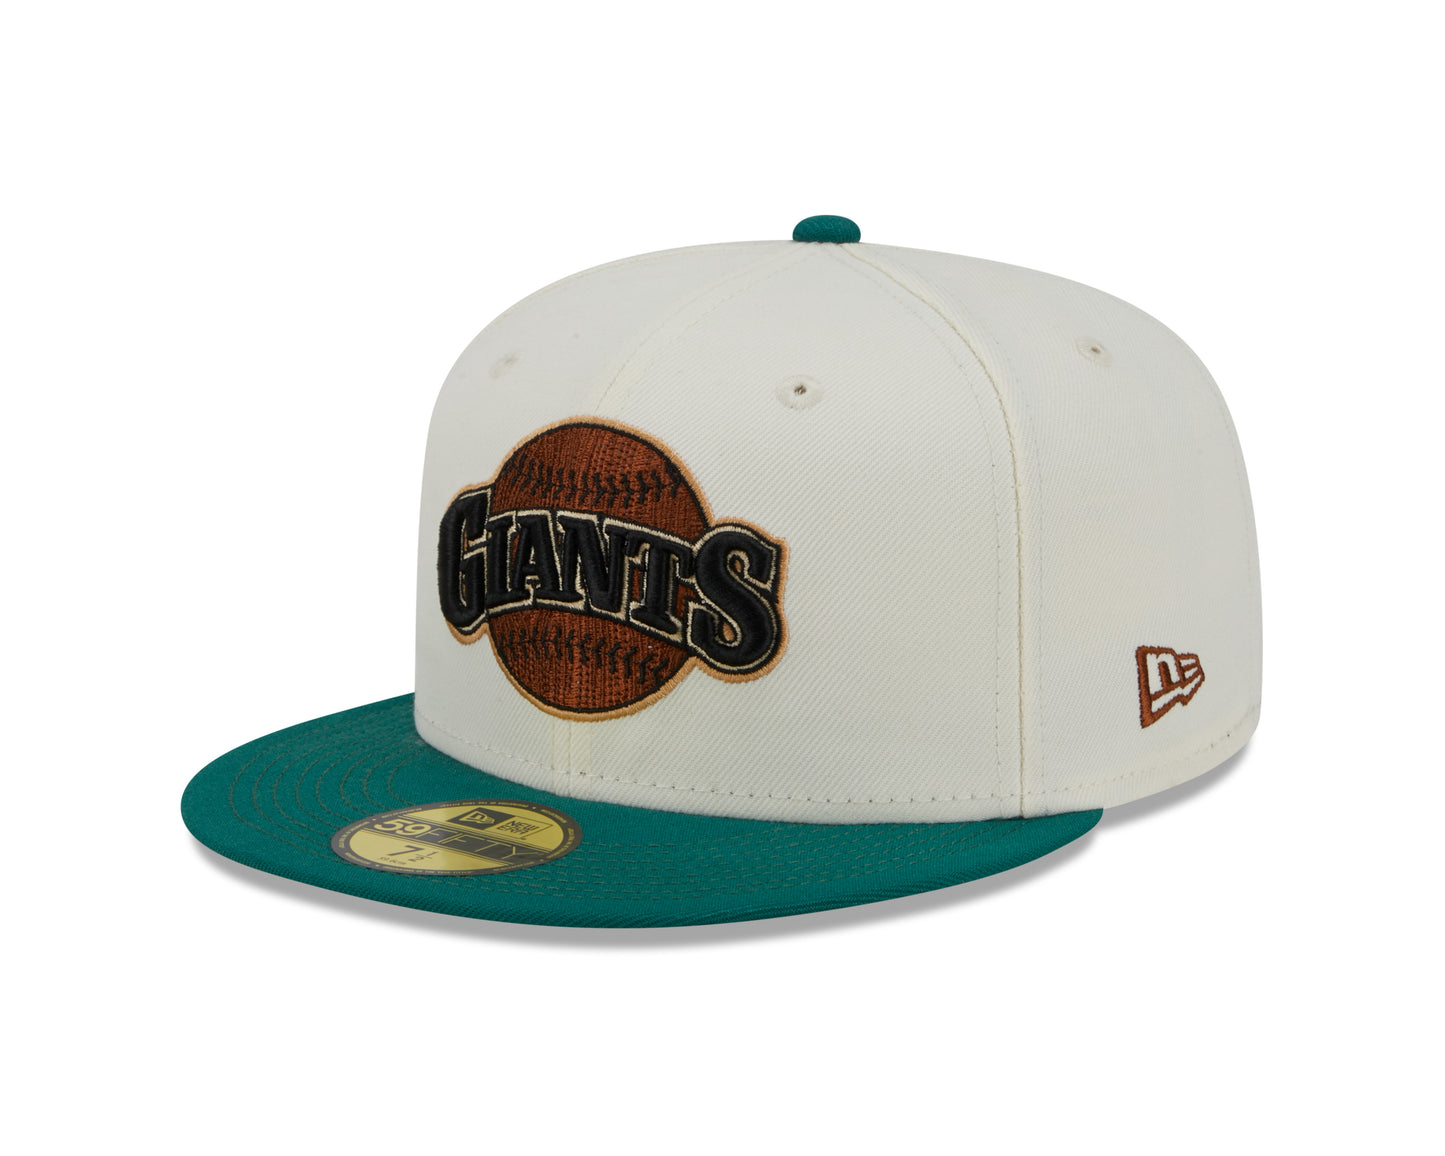 New Era - 59Fifty Fitted Cap - CAMP - San Francisco Giants 50 Years Anniversary - White/Green - Headz Up 